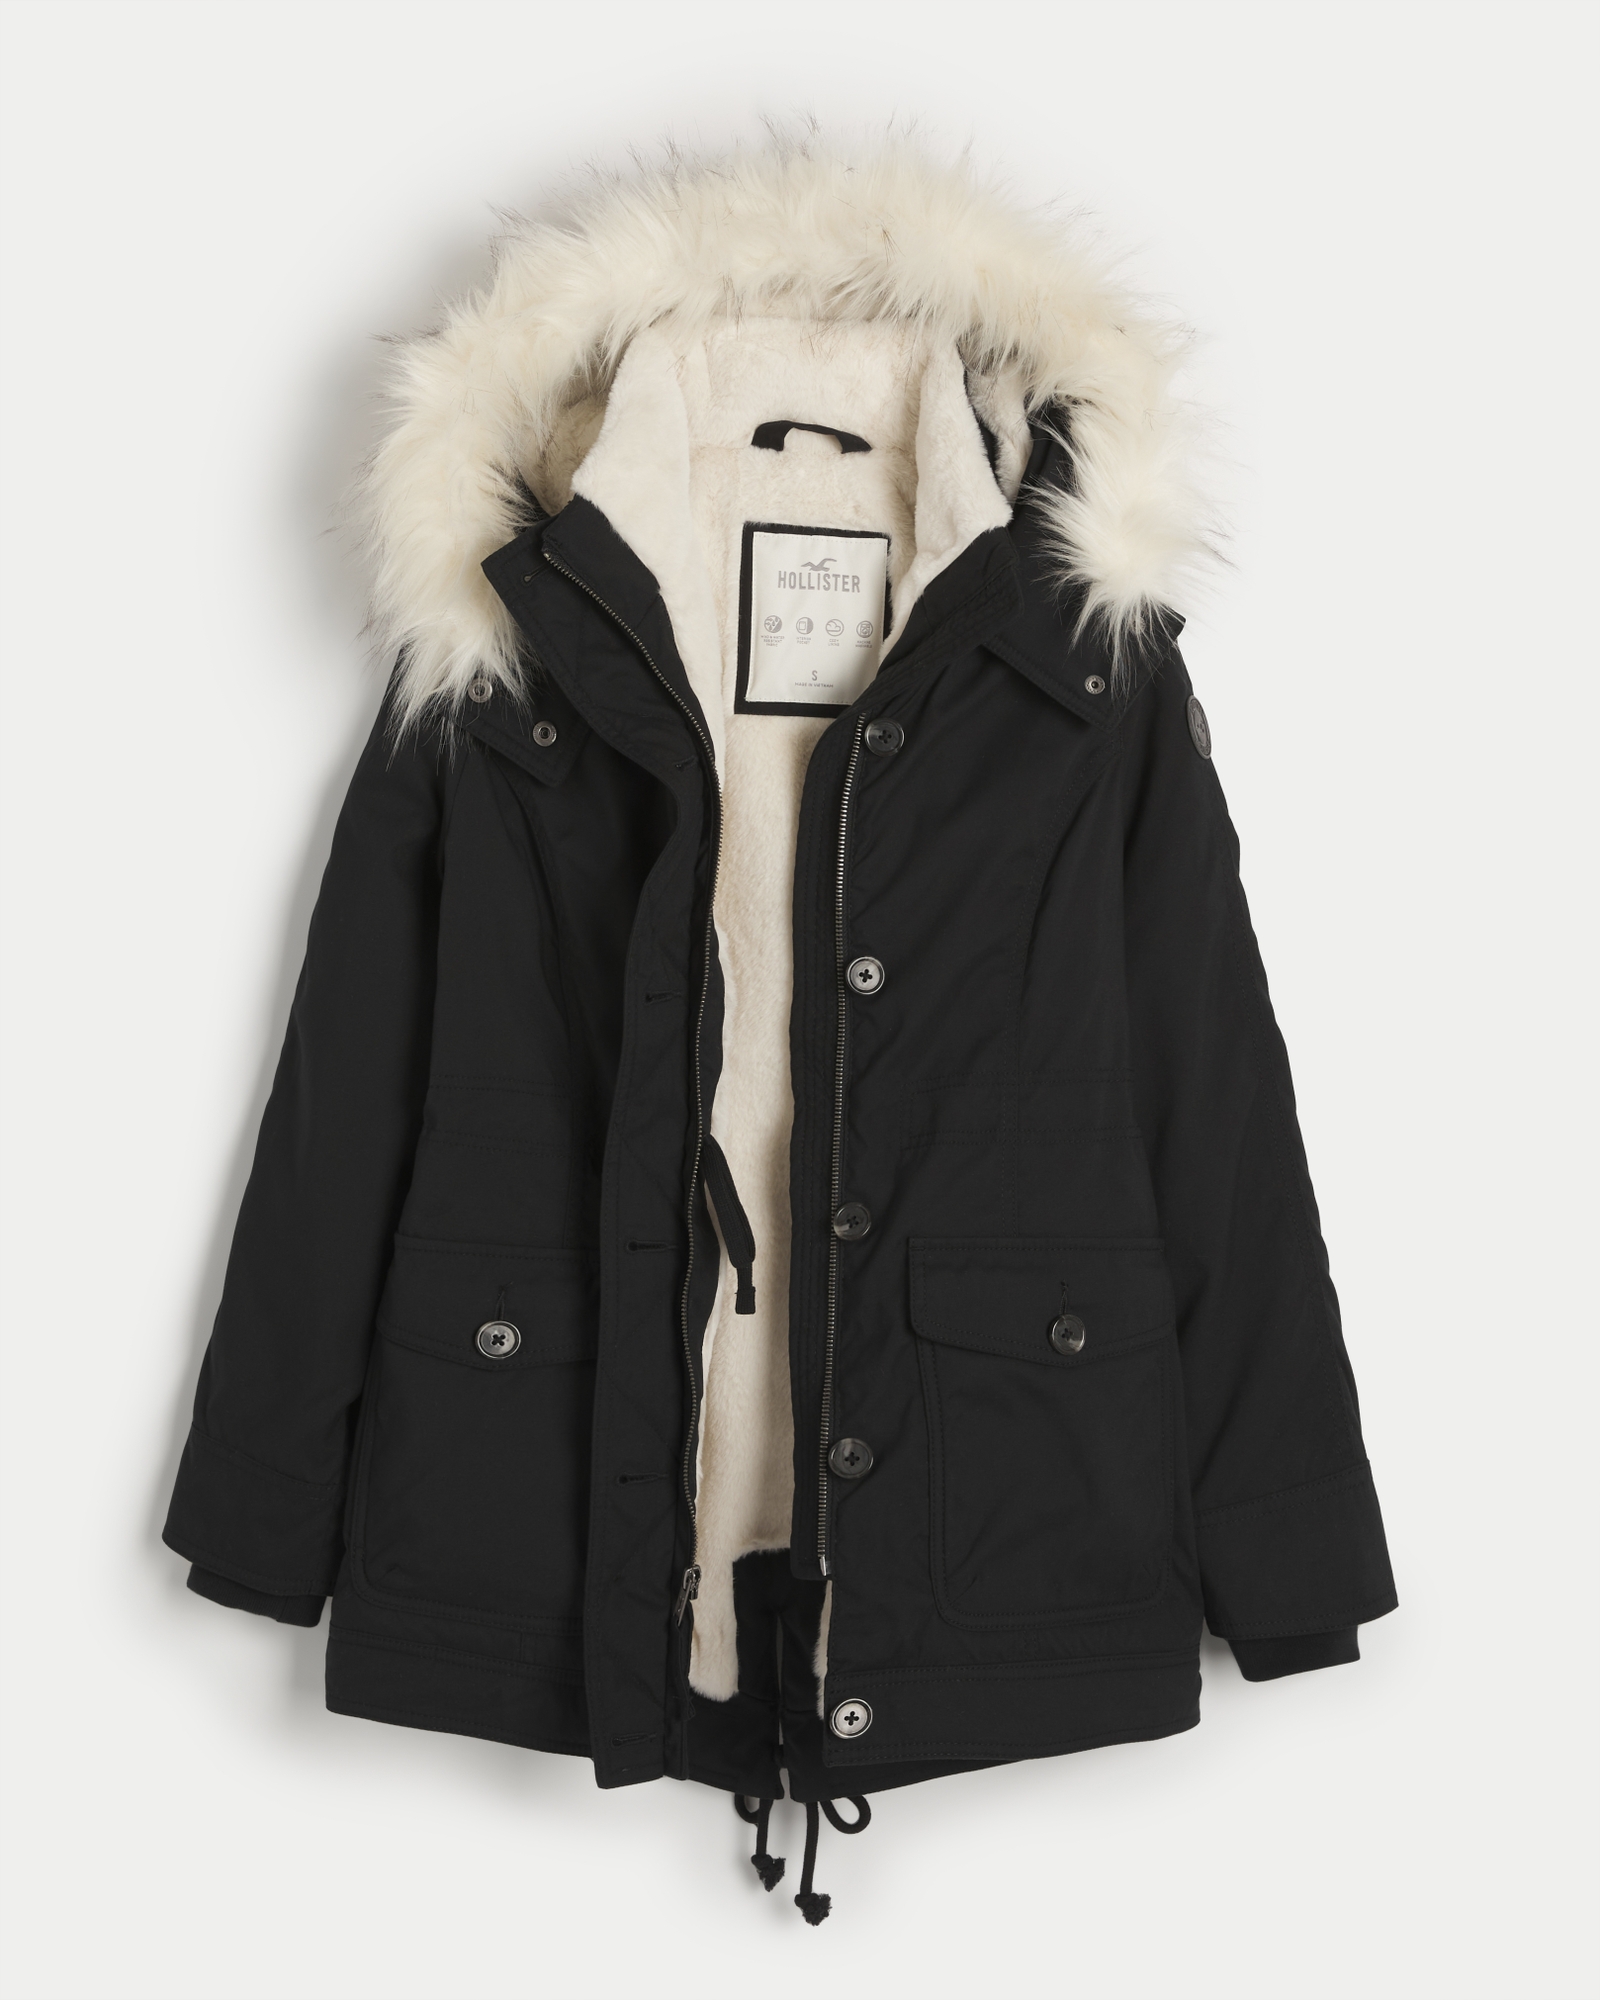 Arrow Point Parka  Hollister clothes, Cool outfits, Long winter coats